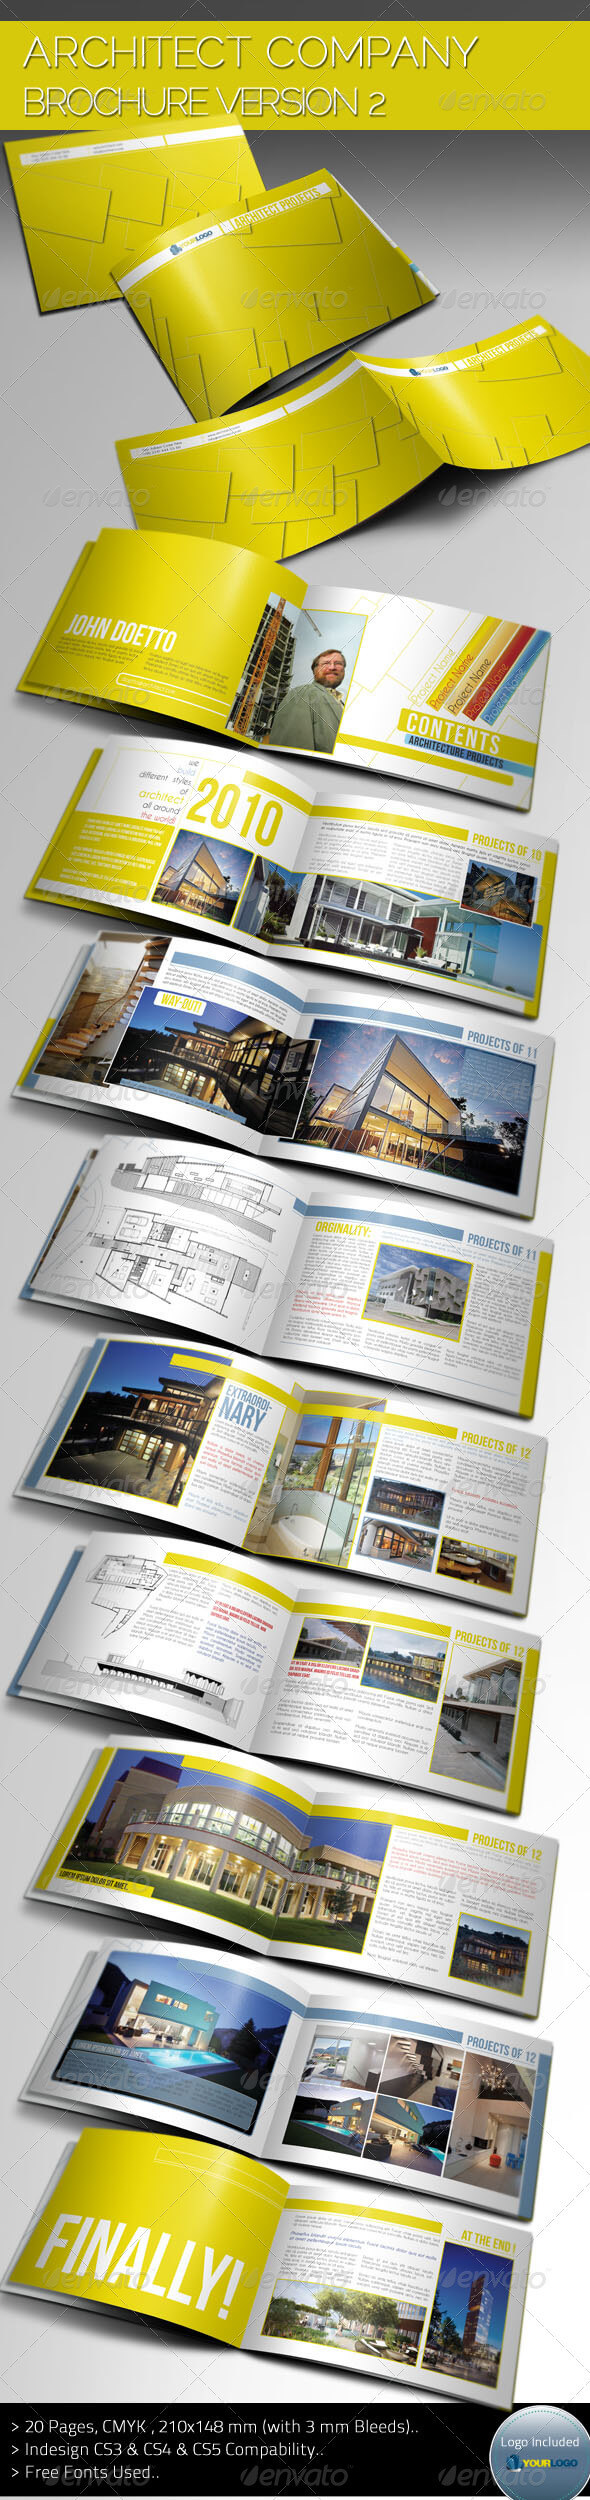 Indesign Brochure Template Graphics, Designs & Templates Intended For Architecture Brochure Templates Free Download